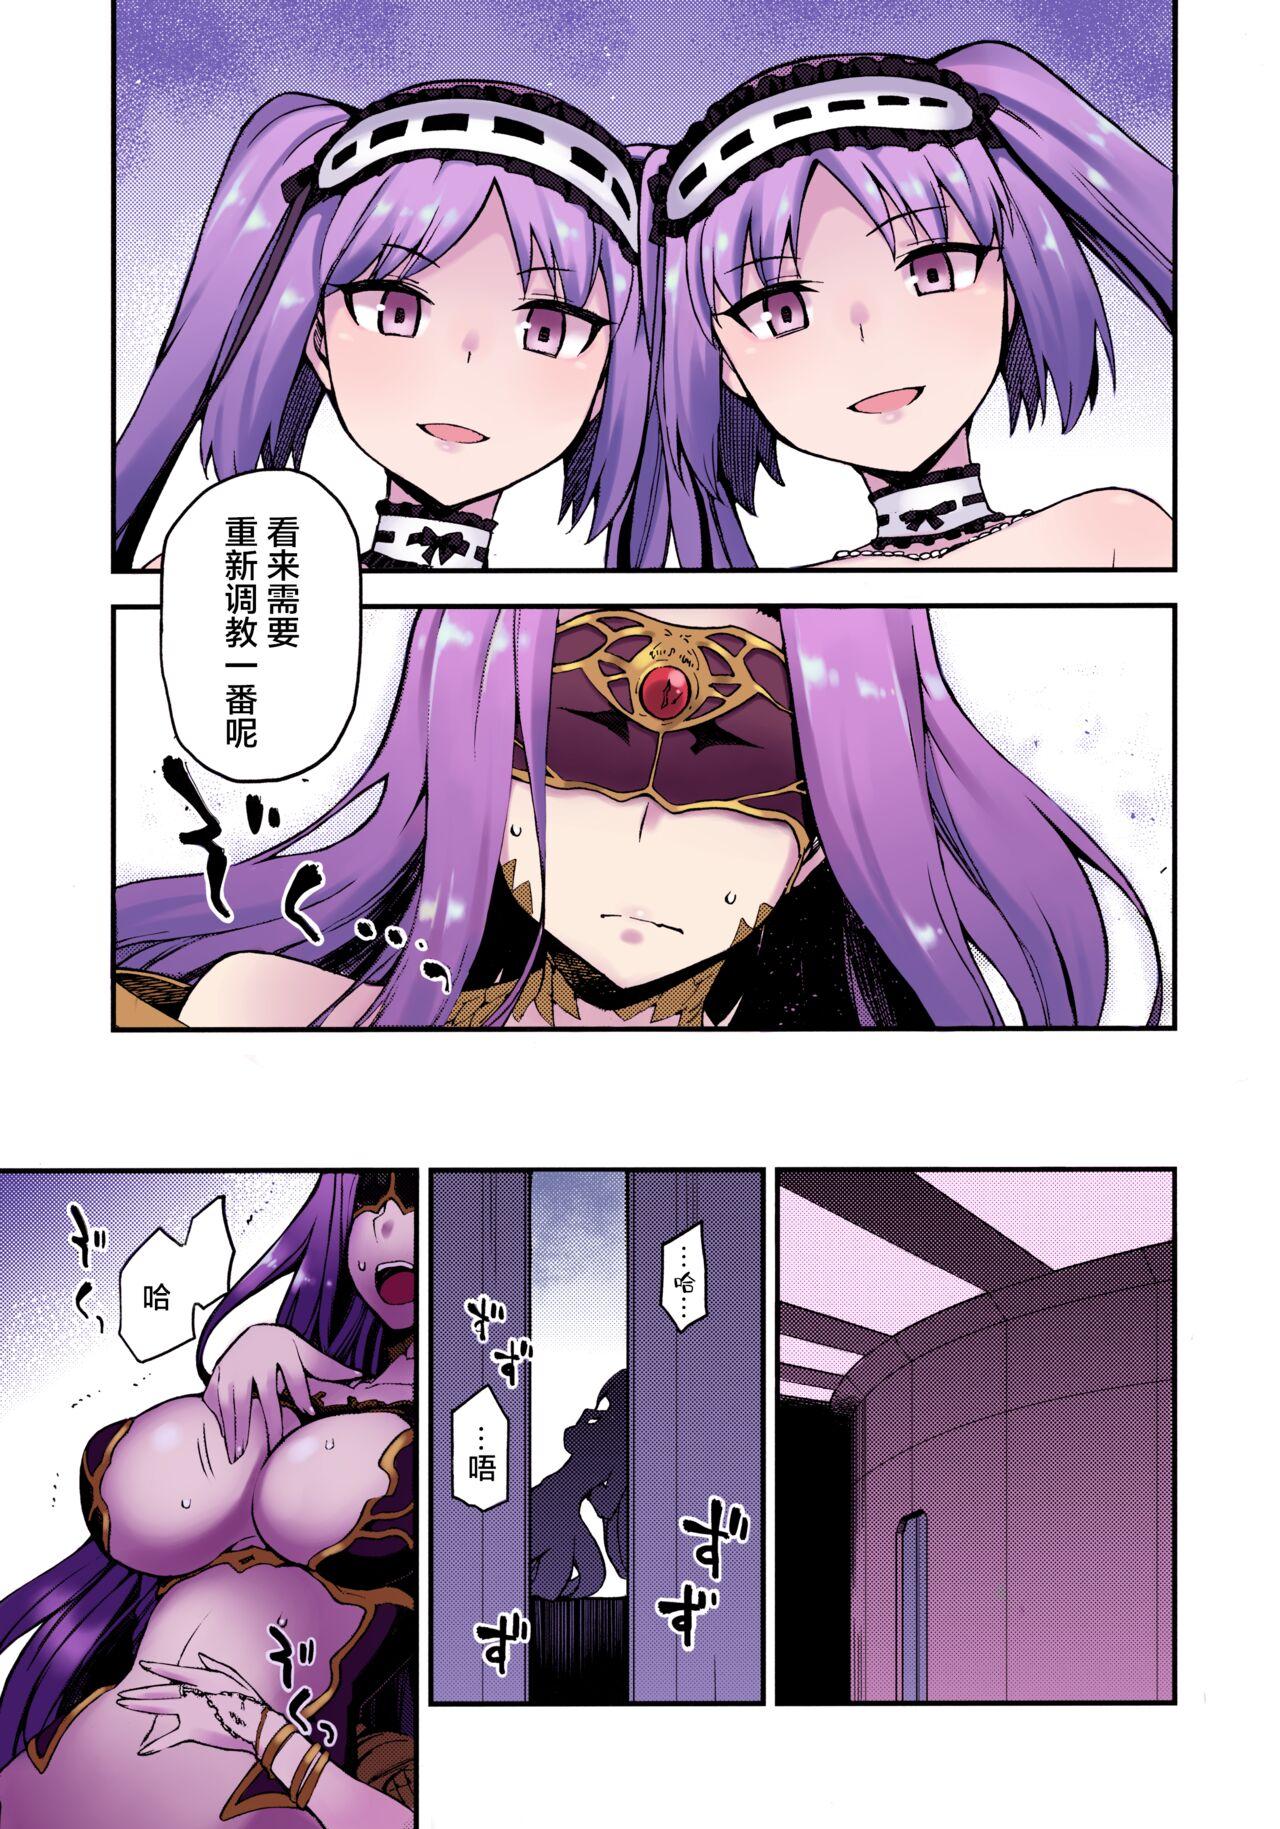 Free Hebigami no Honnou - Fate grand order Plumper - Page 4